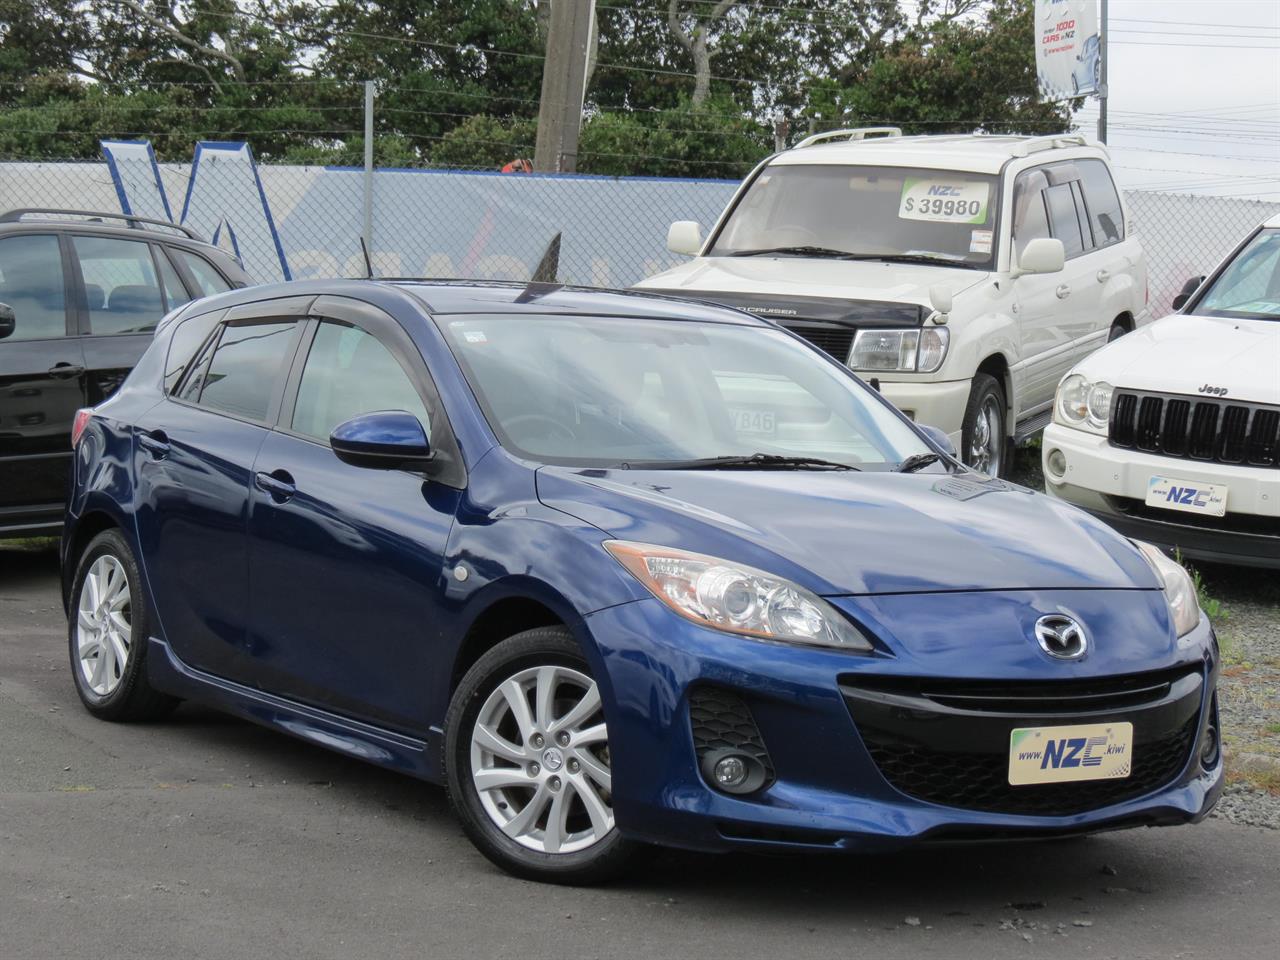 NZC 2012 Mazda Axela just arrived to Auckland